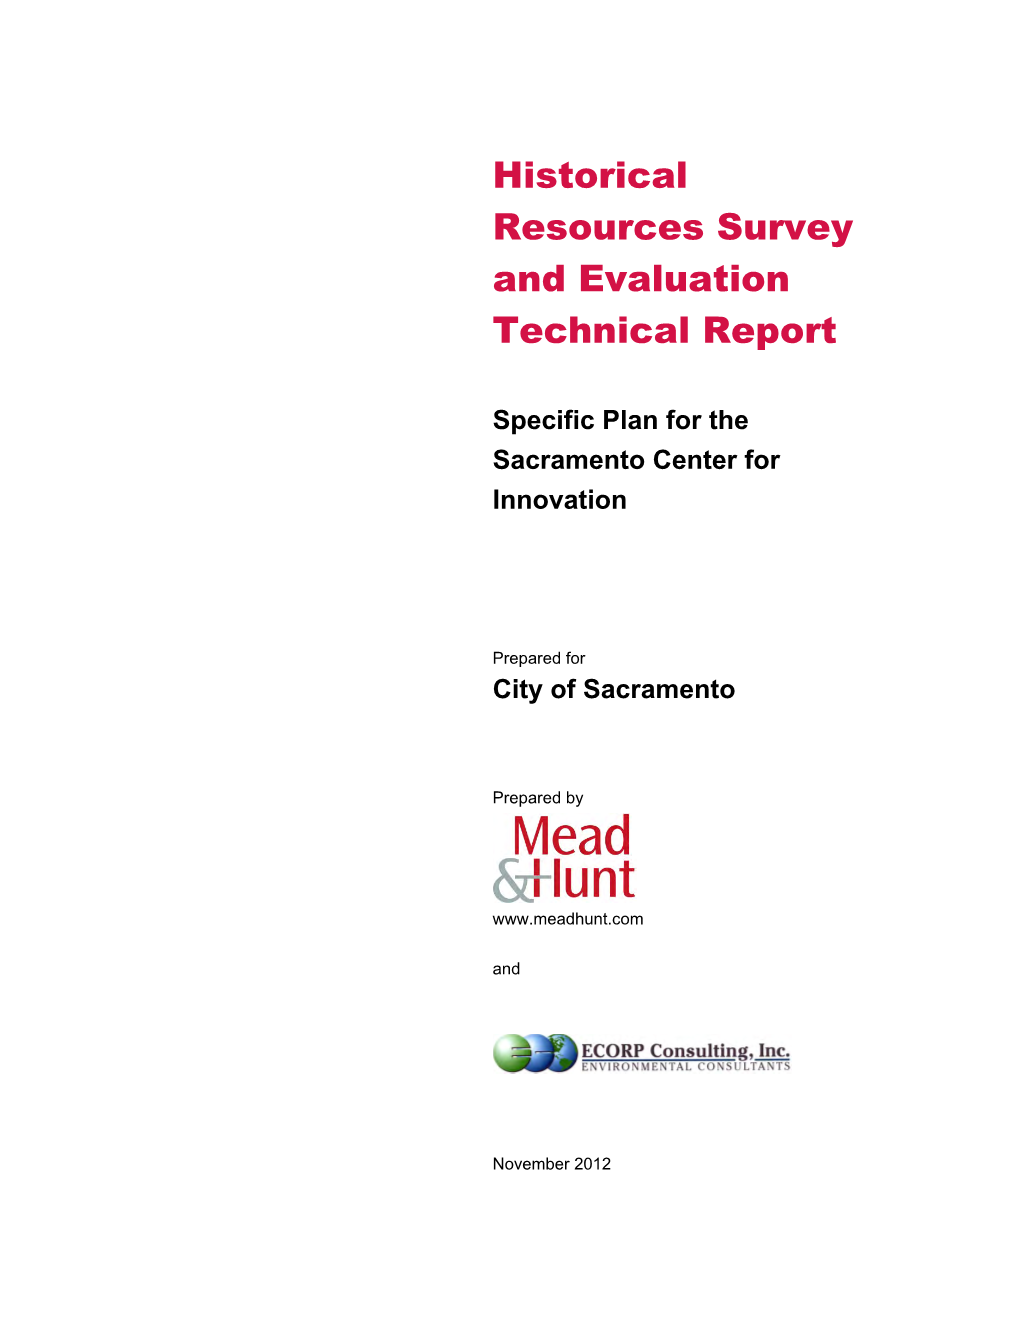 Historical Resources Survey and Evaluation Technical Report